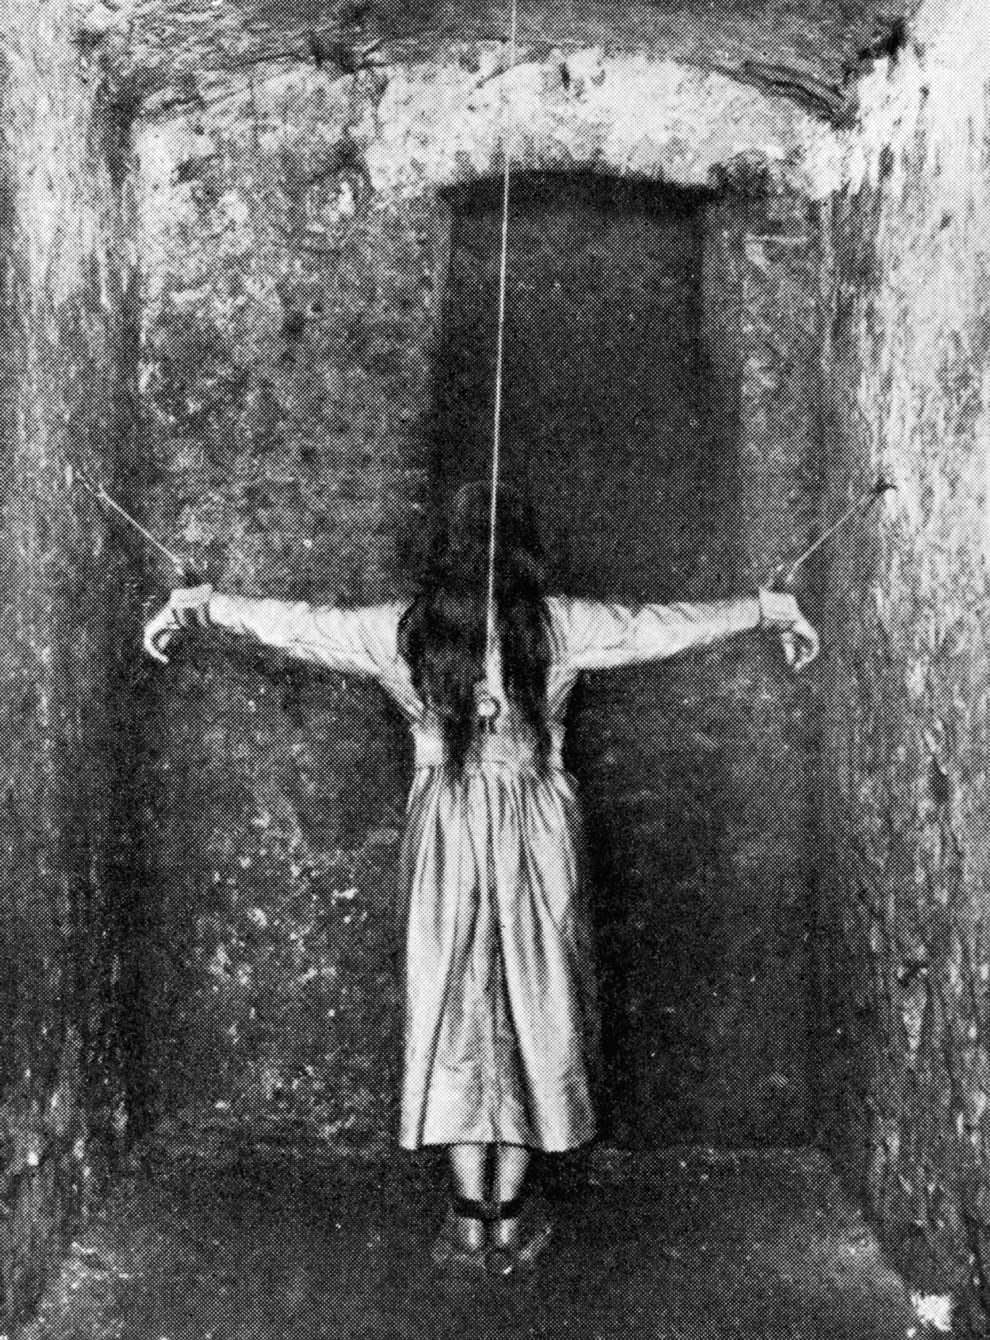 A patient is restrained in a mental institution in France in 1900